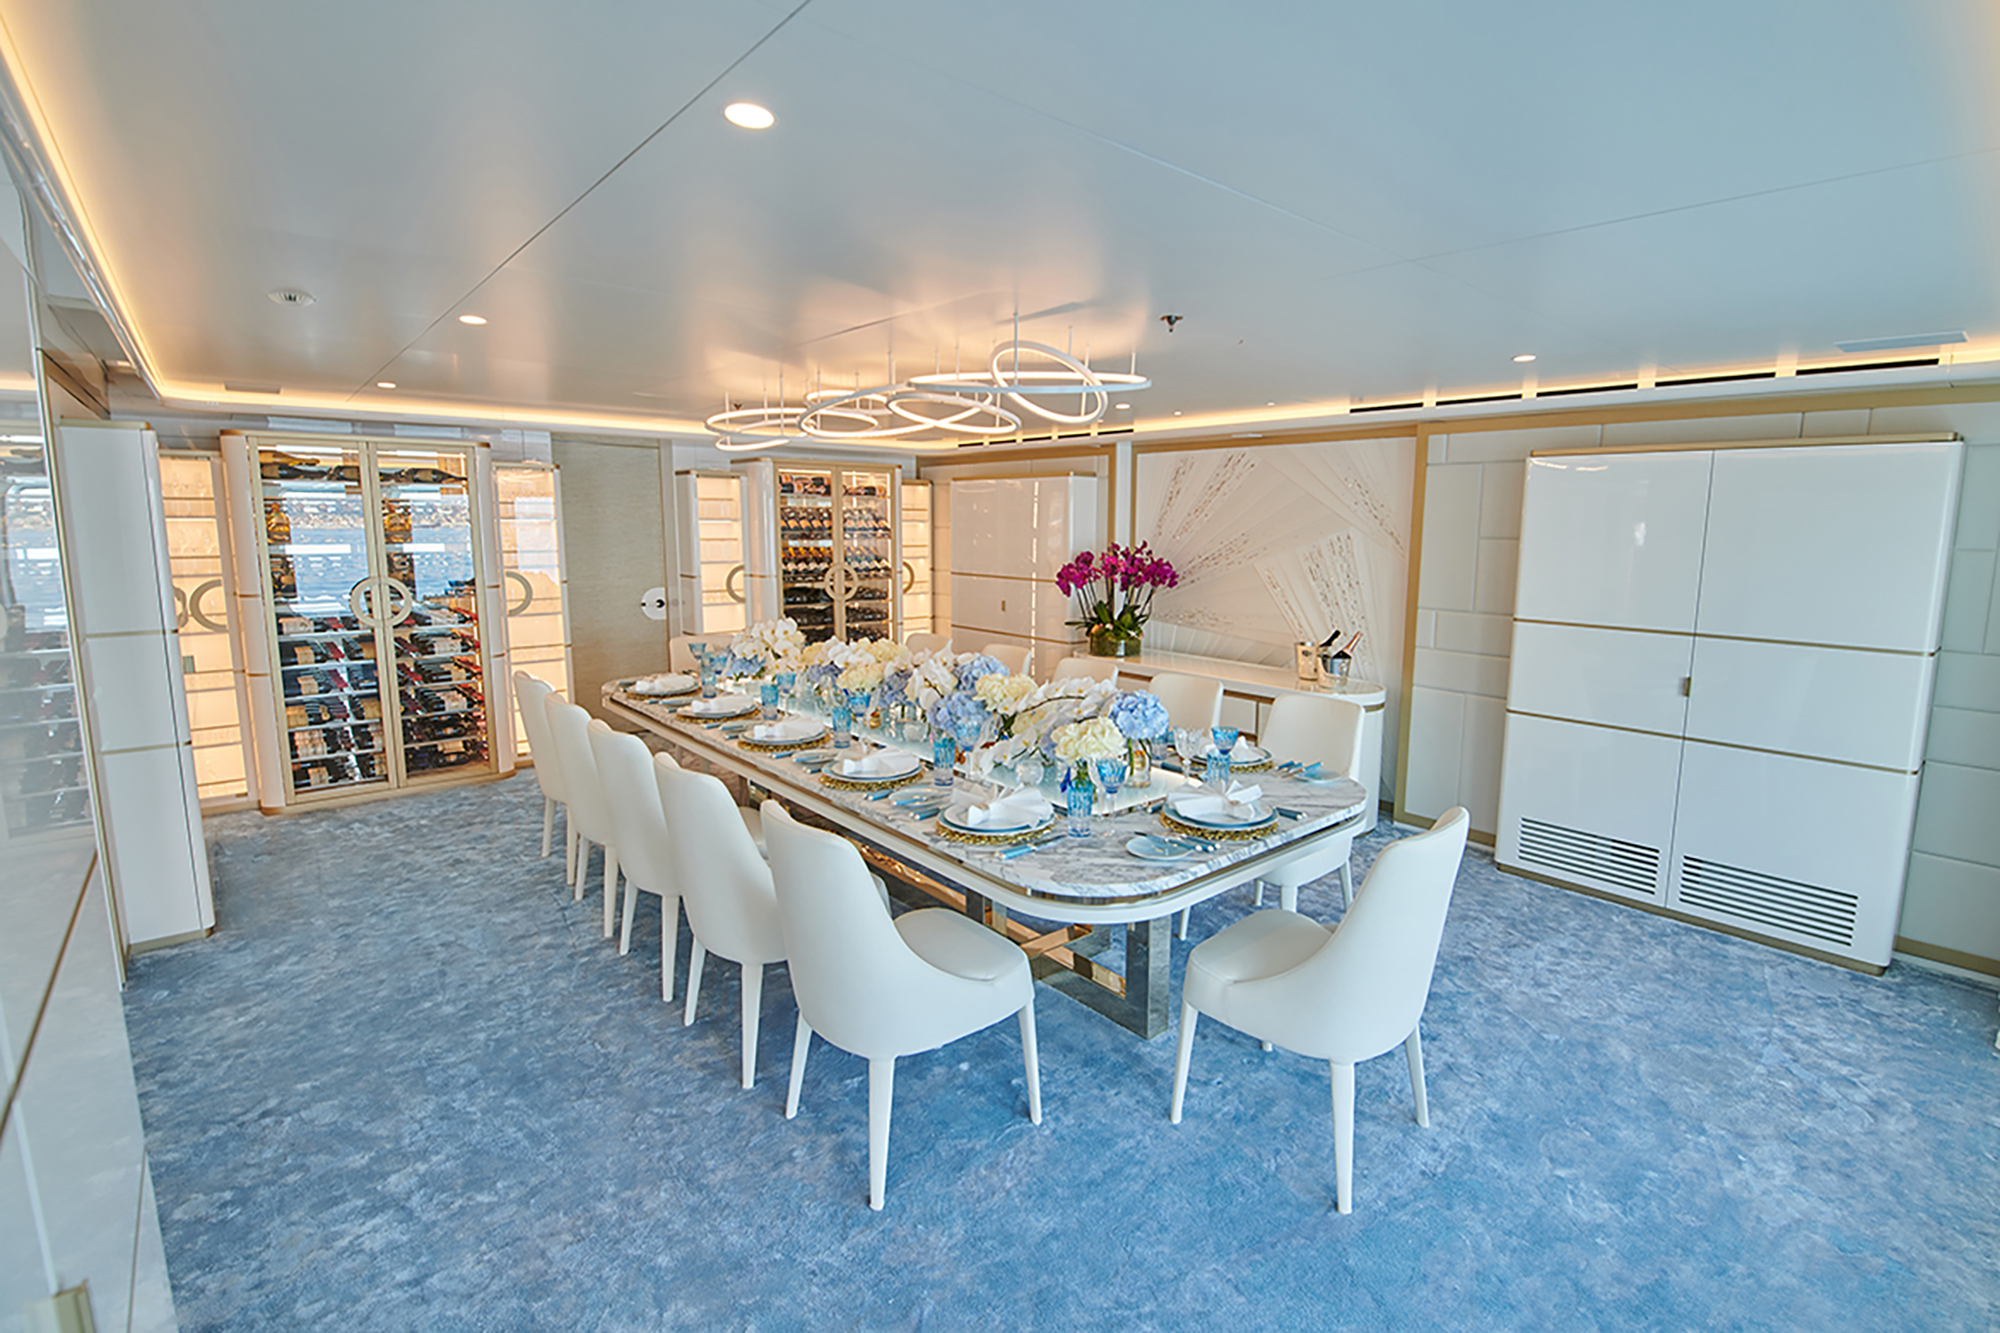 Main deck dining setting for 14 guests